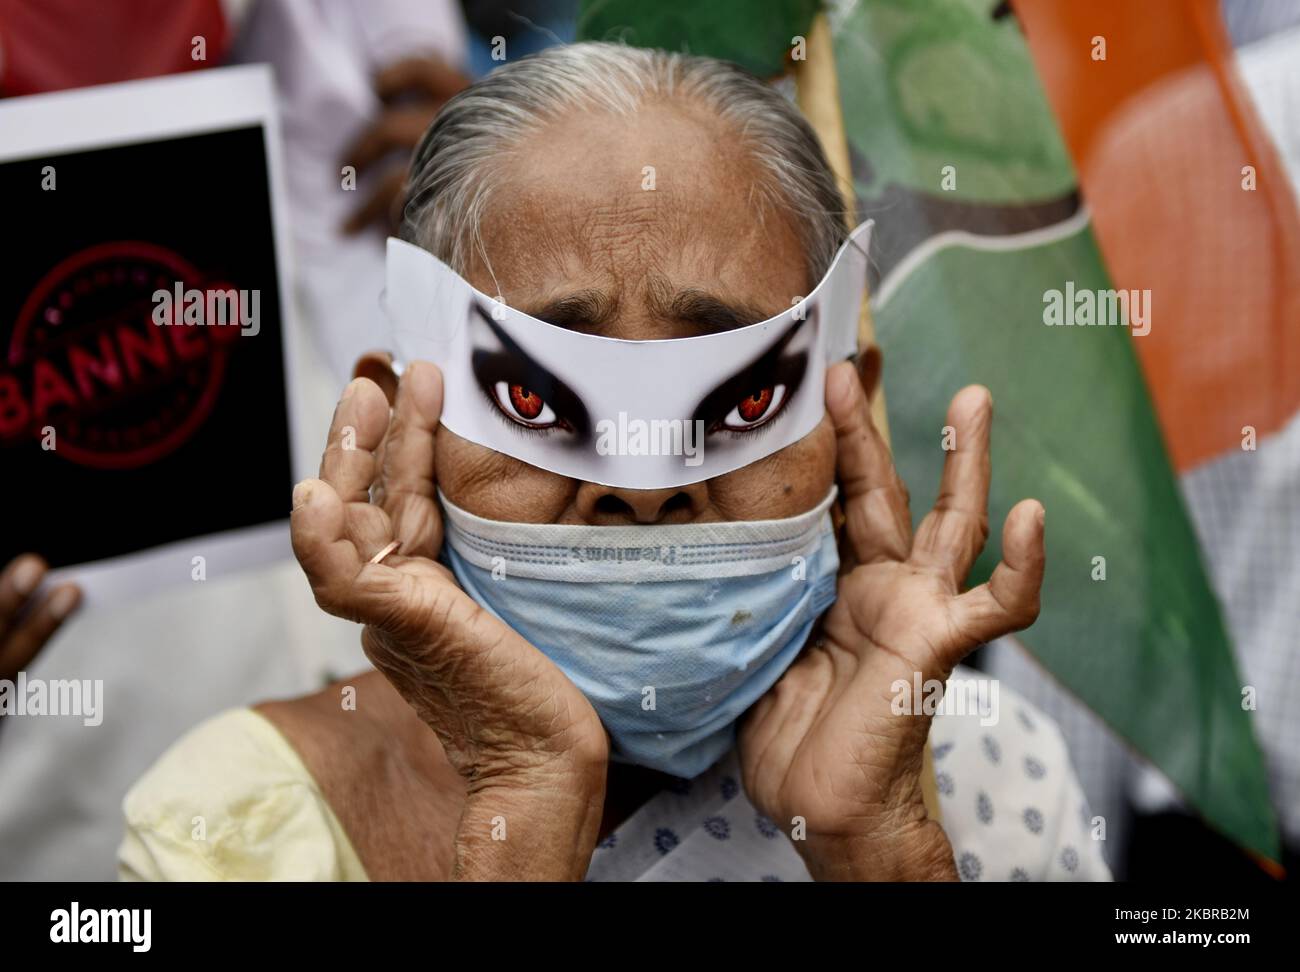 A Congress party supporter wears a mask with red eyes during an anti-China demonstration in Kolkata on June 18, 2020. India and China agreed on June 17 to ease tensions at their disputed Himalayan border, even as they traded blame for a brawl that left at least 20 Indian soldiers dead according to an Indian media report. (Photo by Indranil Aditya/NurPhoto) Stock Photo